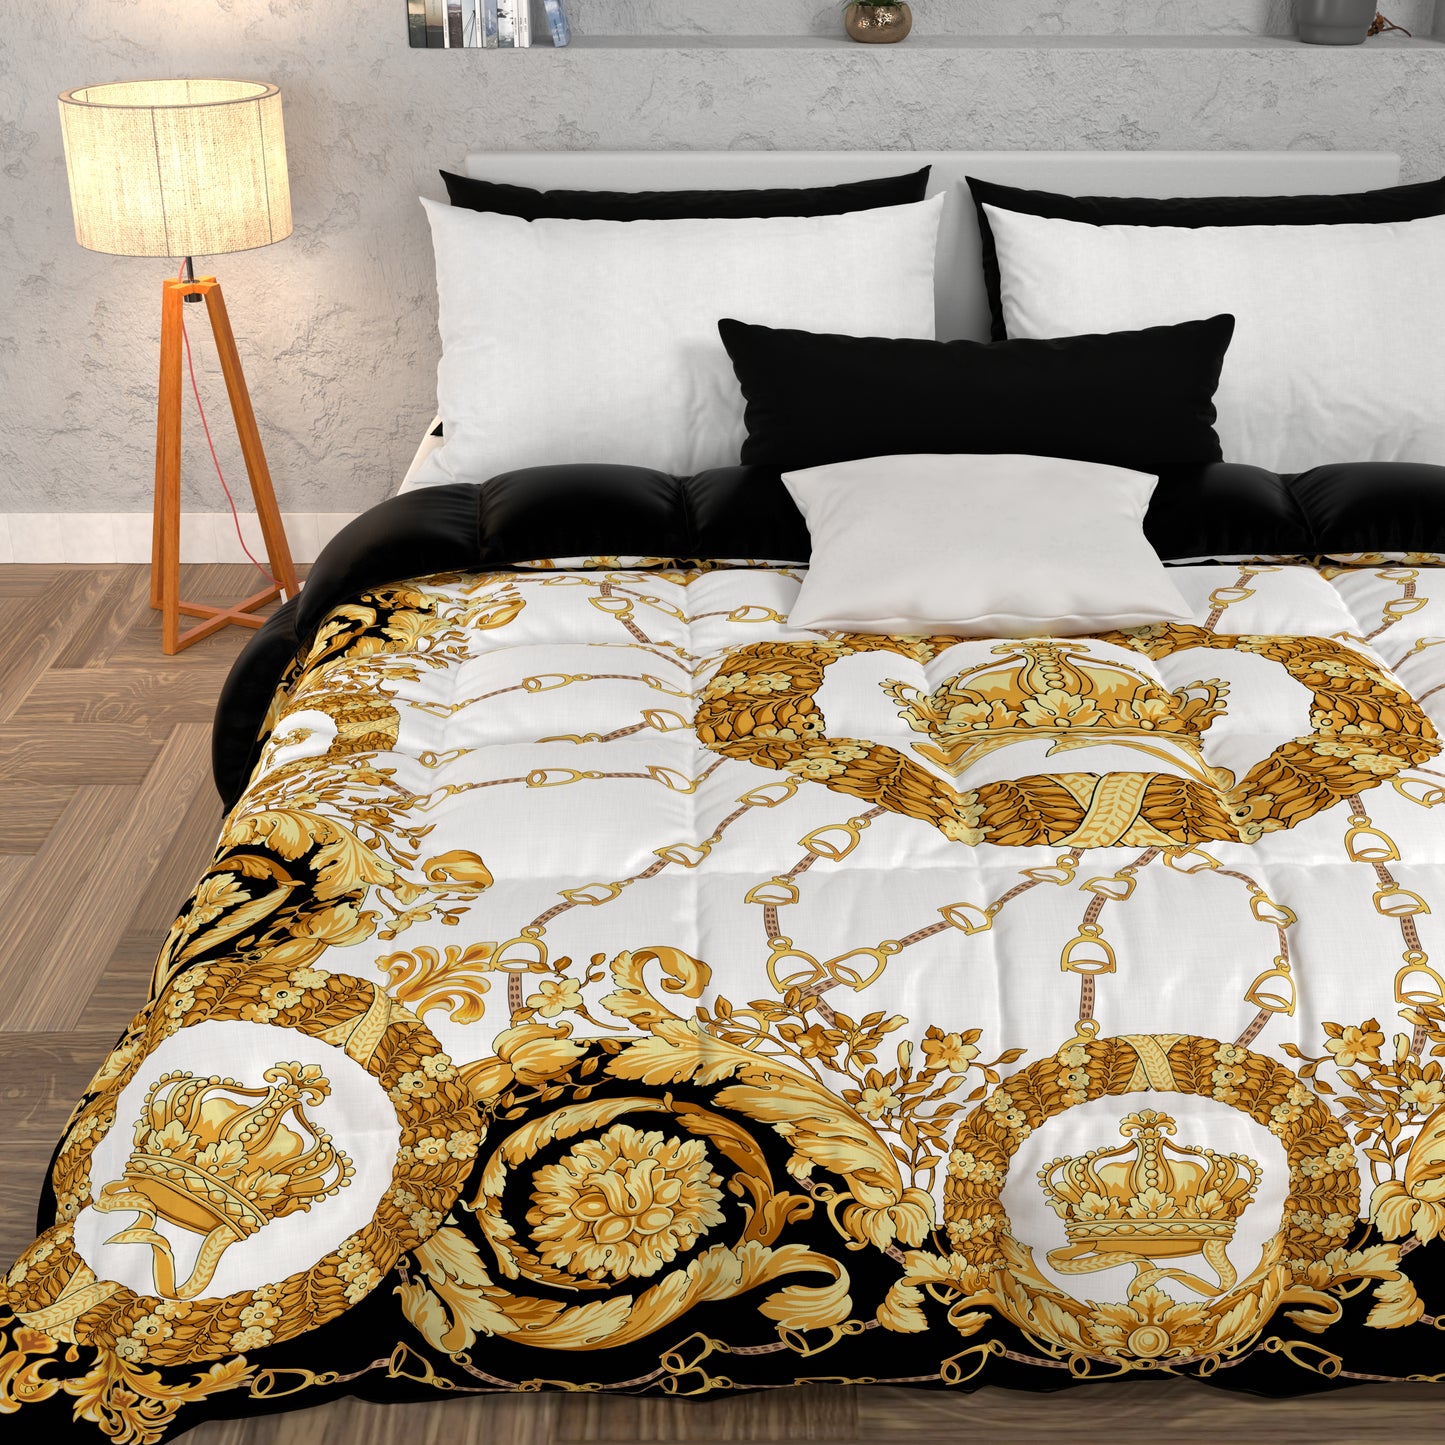 Duvet, Double Quilt, Single, Square and Half, Crown